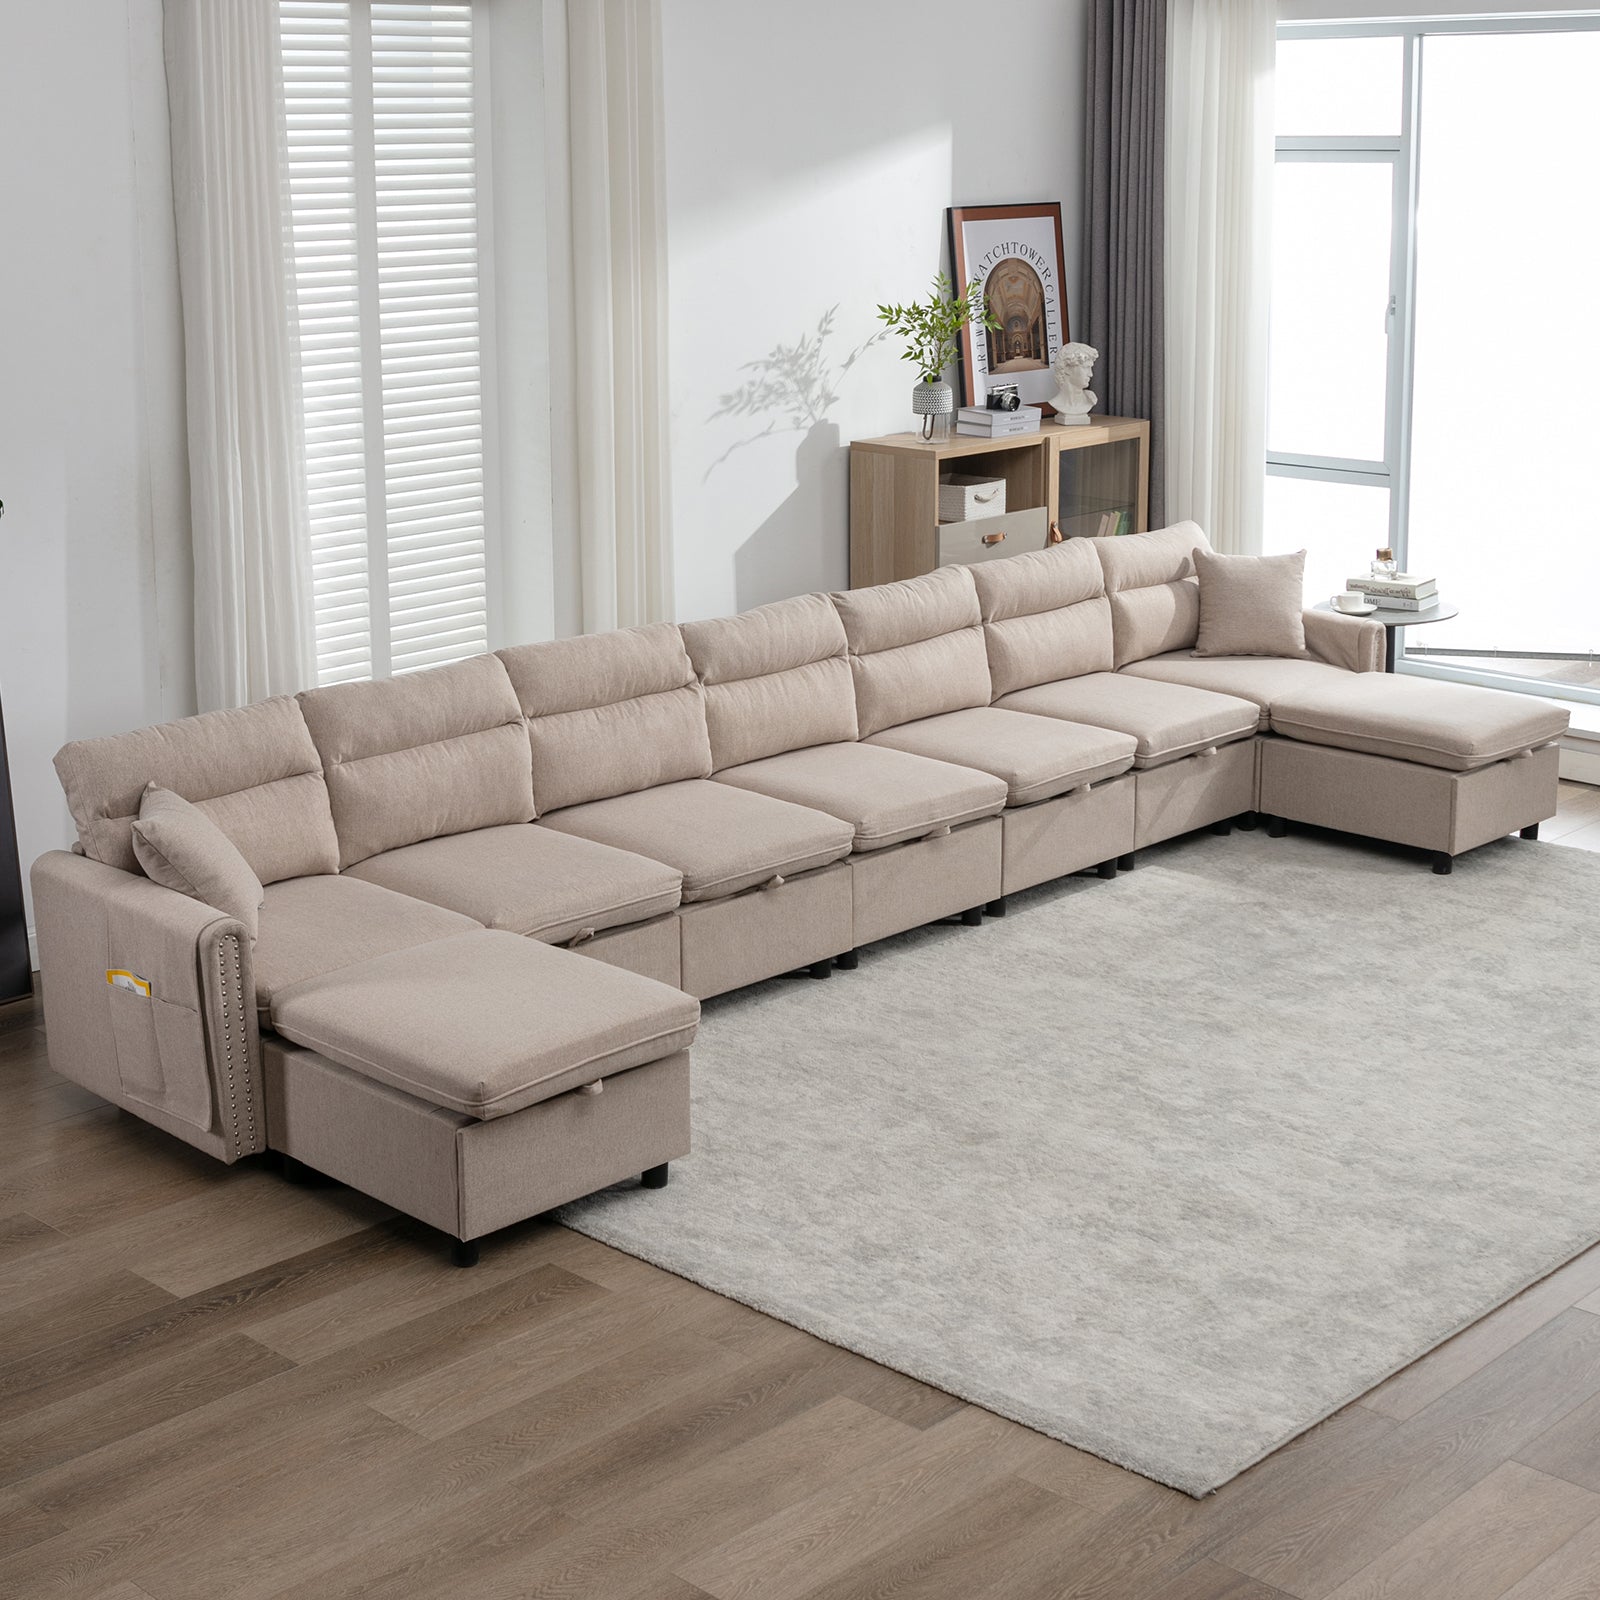 Cecer Sectional Sofa with Storage Seat and Side Pockets, Sectional Couch with Reversible Chaise, Modular Sectional Sofa Set with Linen Upholstered, Modern Living Room Sets